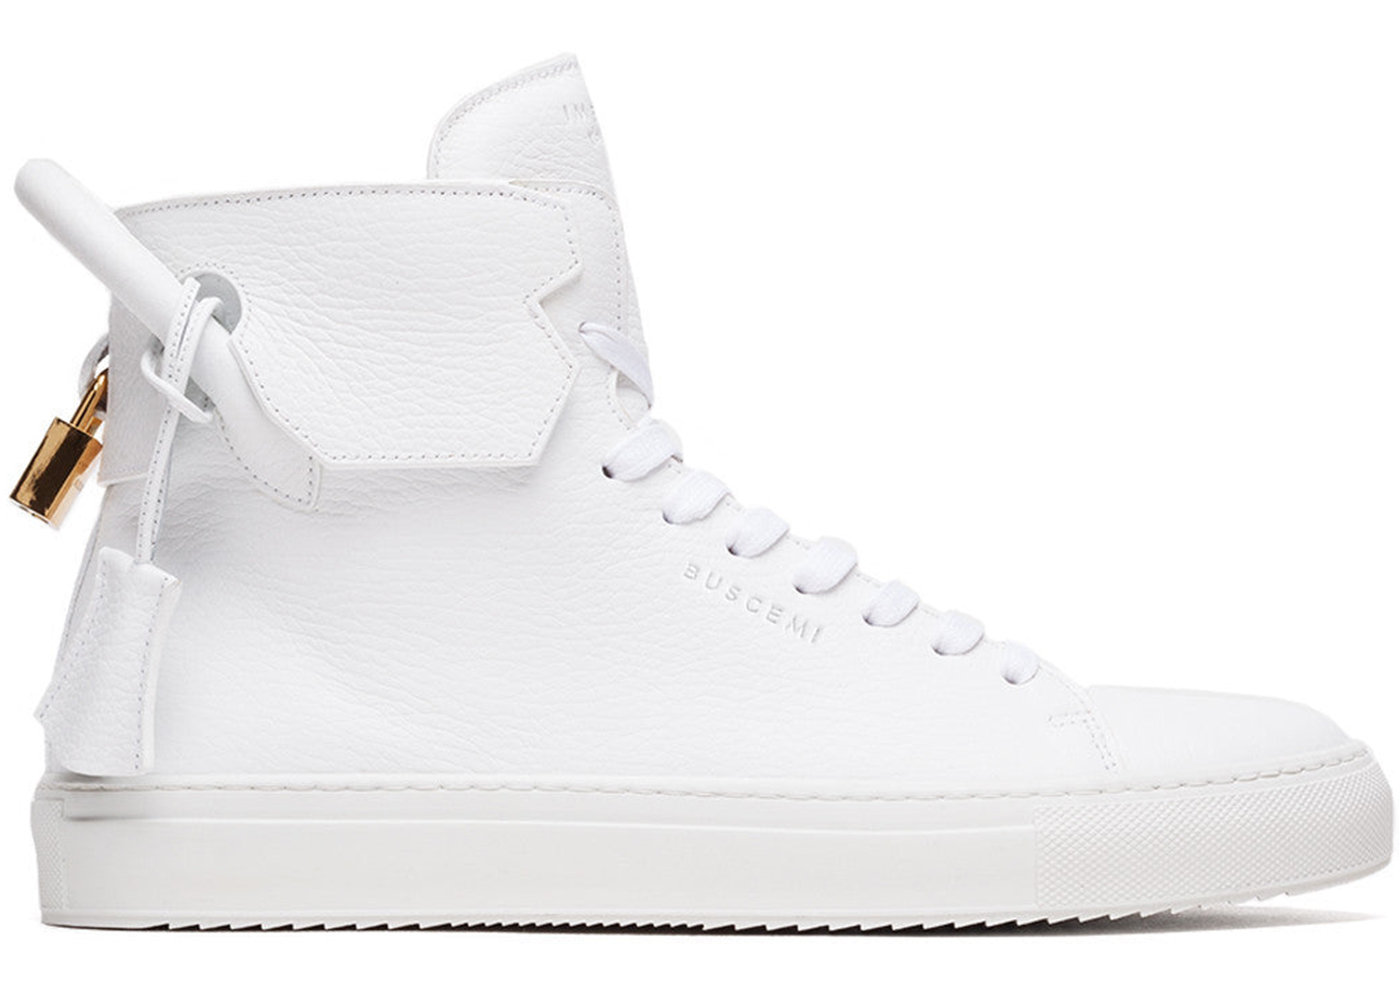 Buscemi Mens 100MM Off White Leather Sneakers Shoes US 6 SAMPLE | eBay